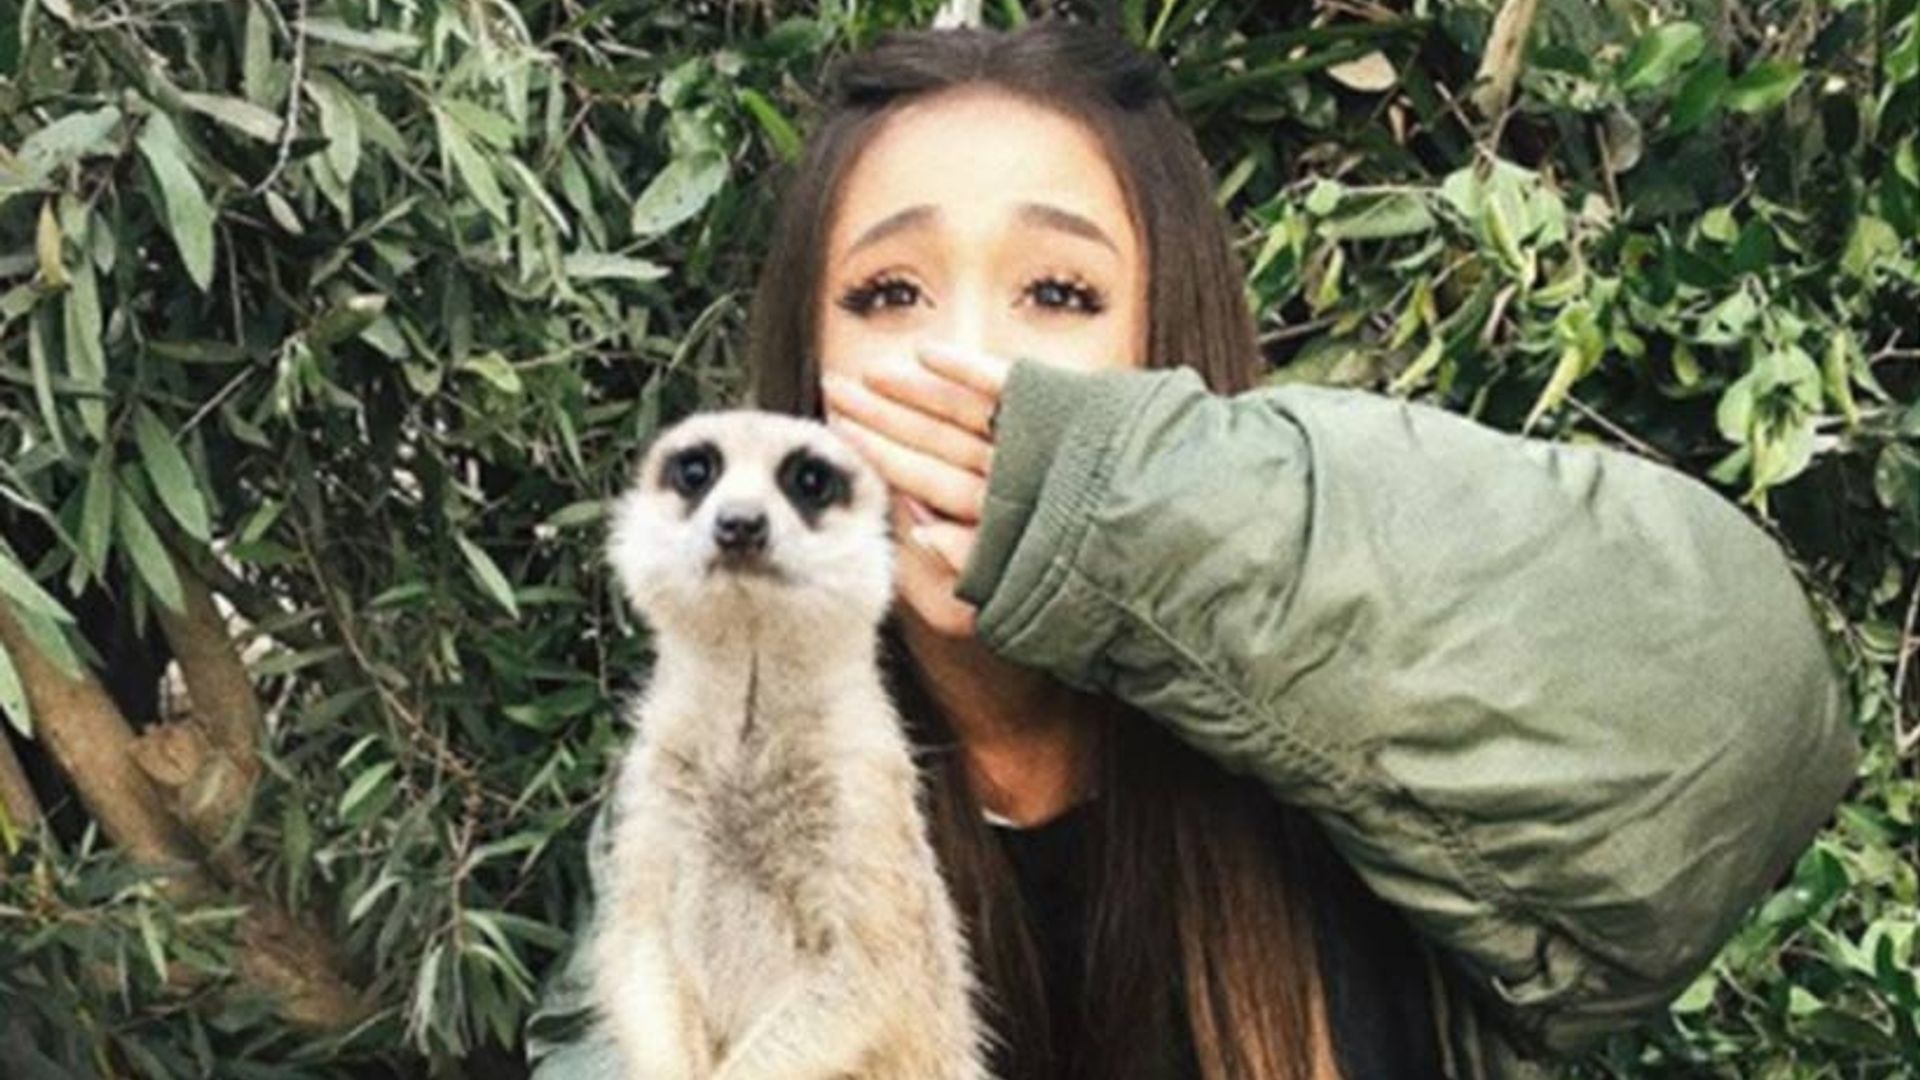 Ariana Grande cuddles koalas and meerkats at the zoo as her Australian tour comes to an end